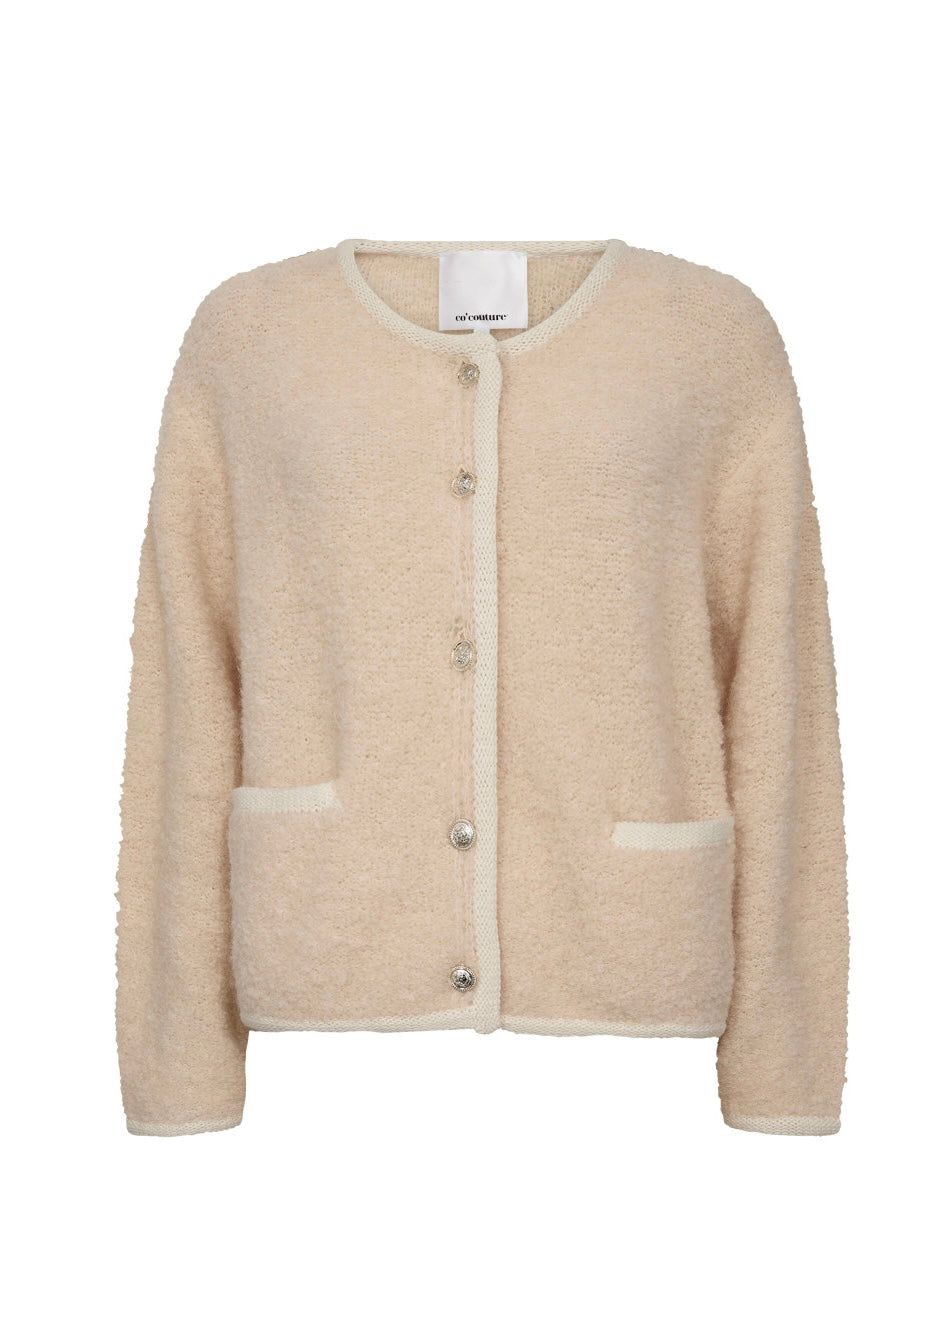 Co’Couture Wool Cardigan Powder